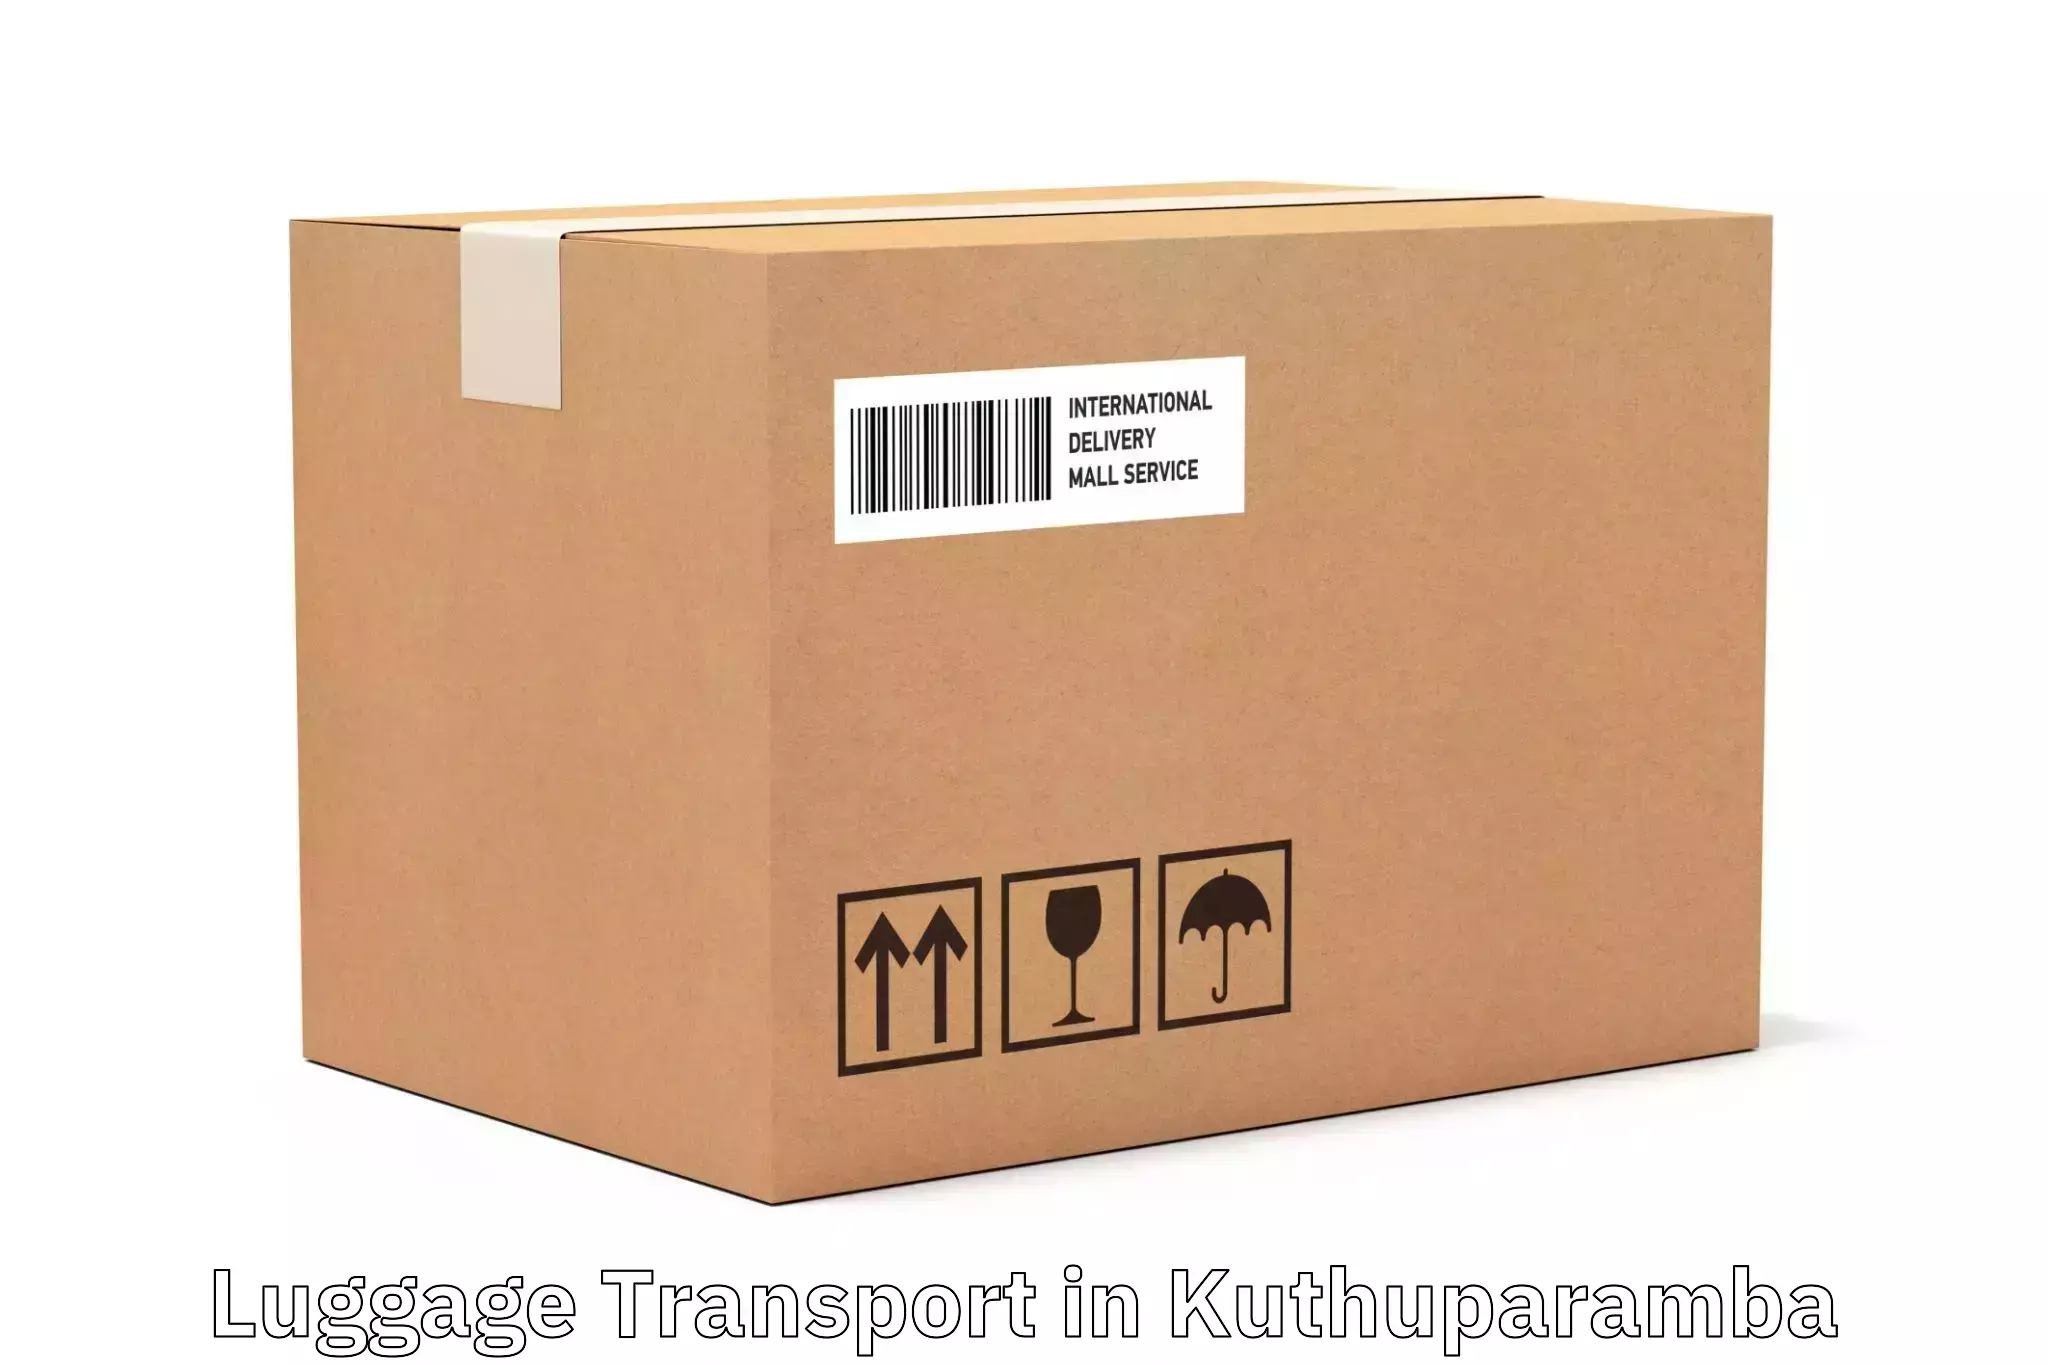 Baggage transport professionals in Kuthuparamba